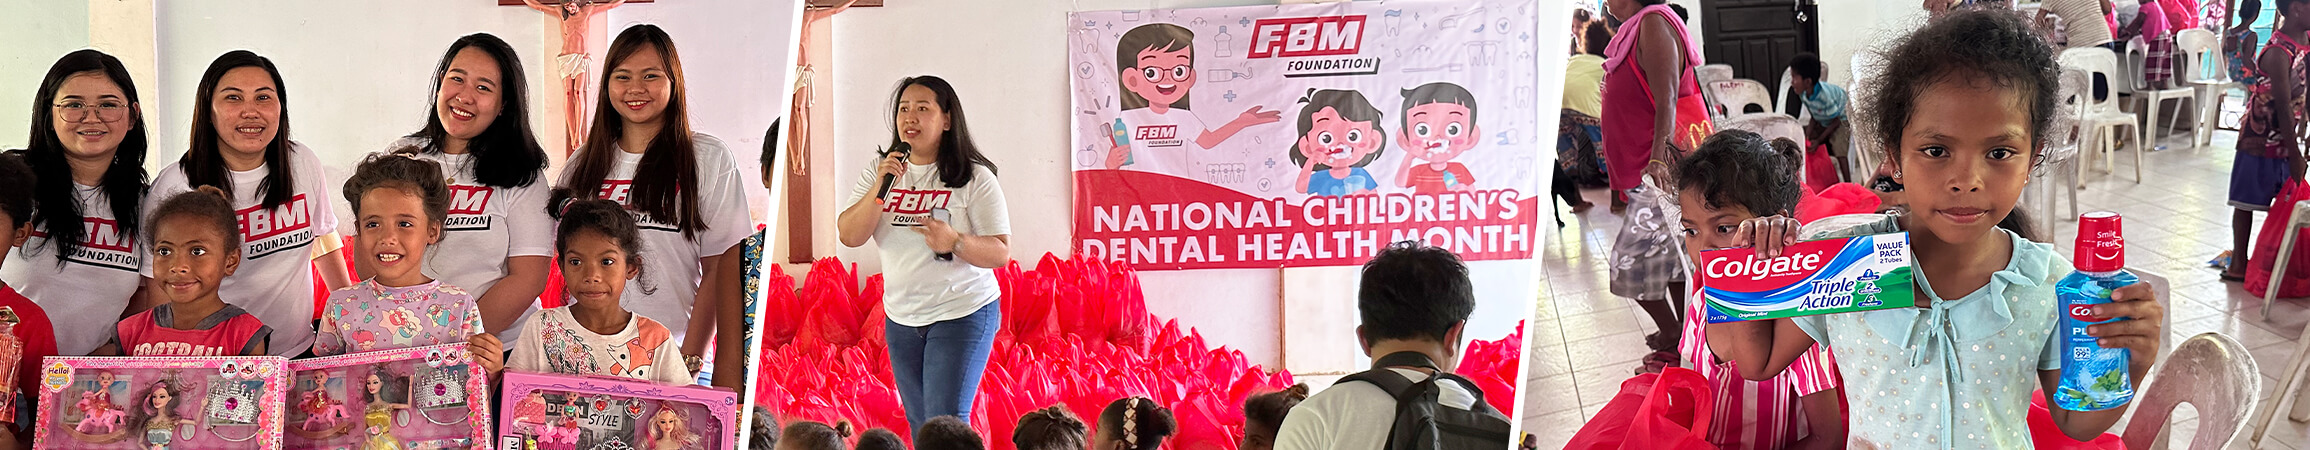 FBM® Foundation promotes Dental Health Month with awareness initiative in Subic